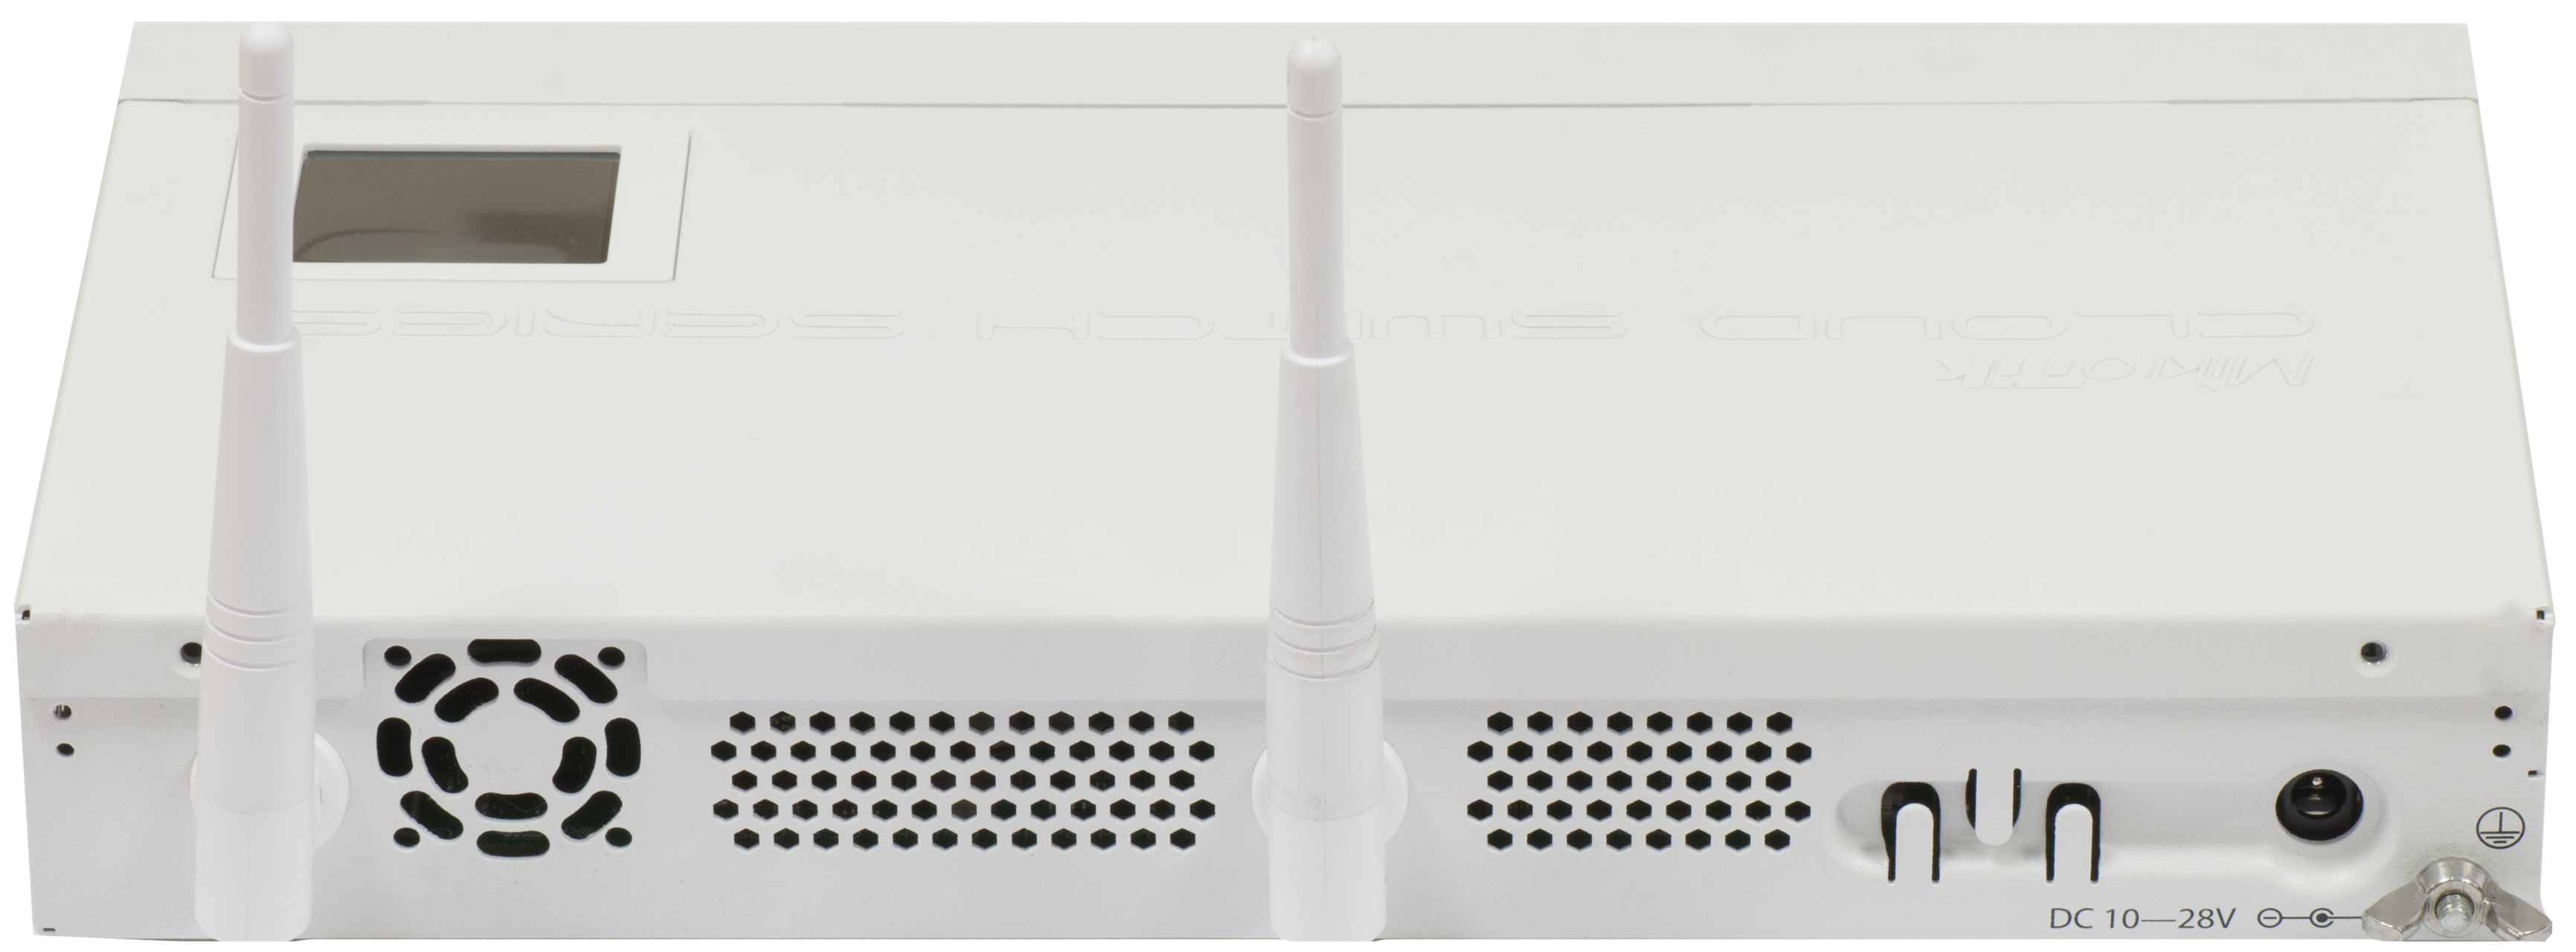 MikroTik CRS125-24G-1S-IN Cloud Router Gigabit Switch 24x 10/100/1000 Gbps ports 